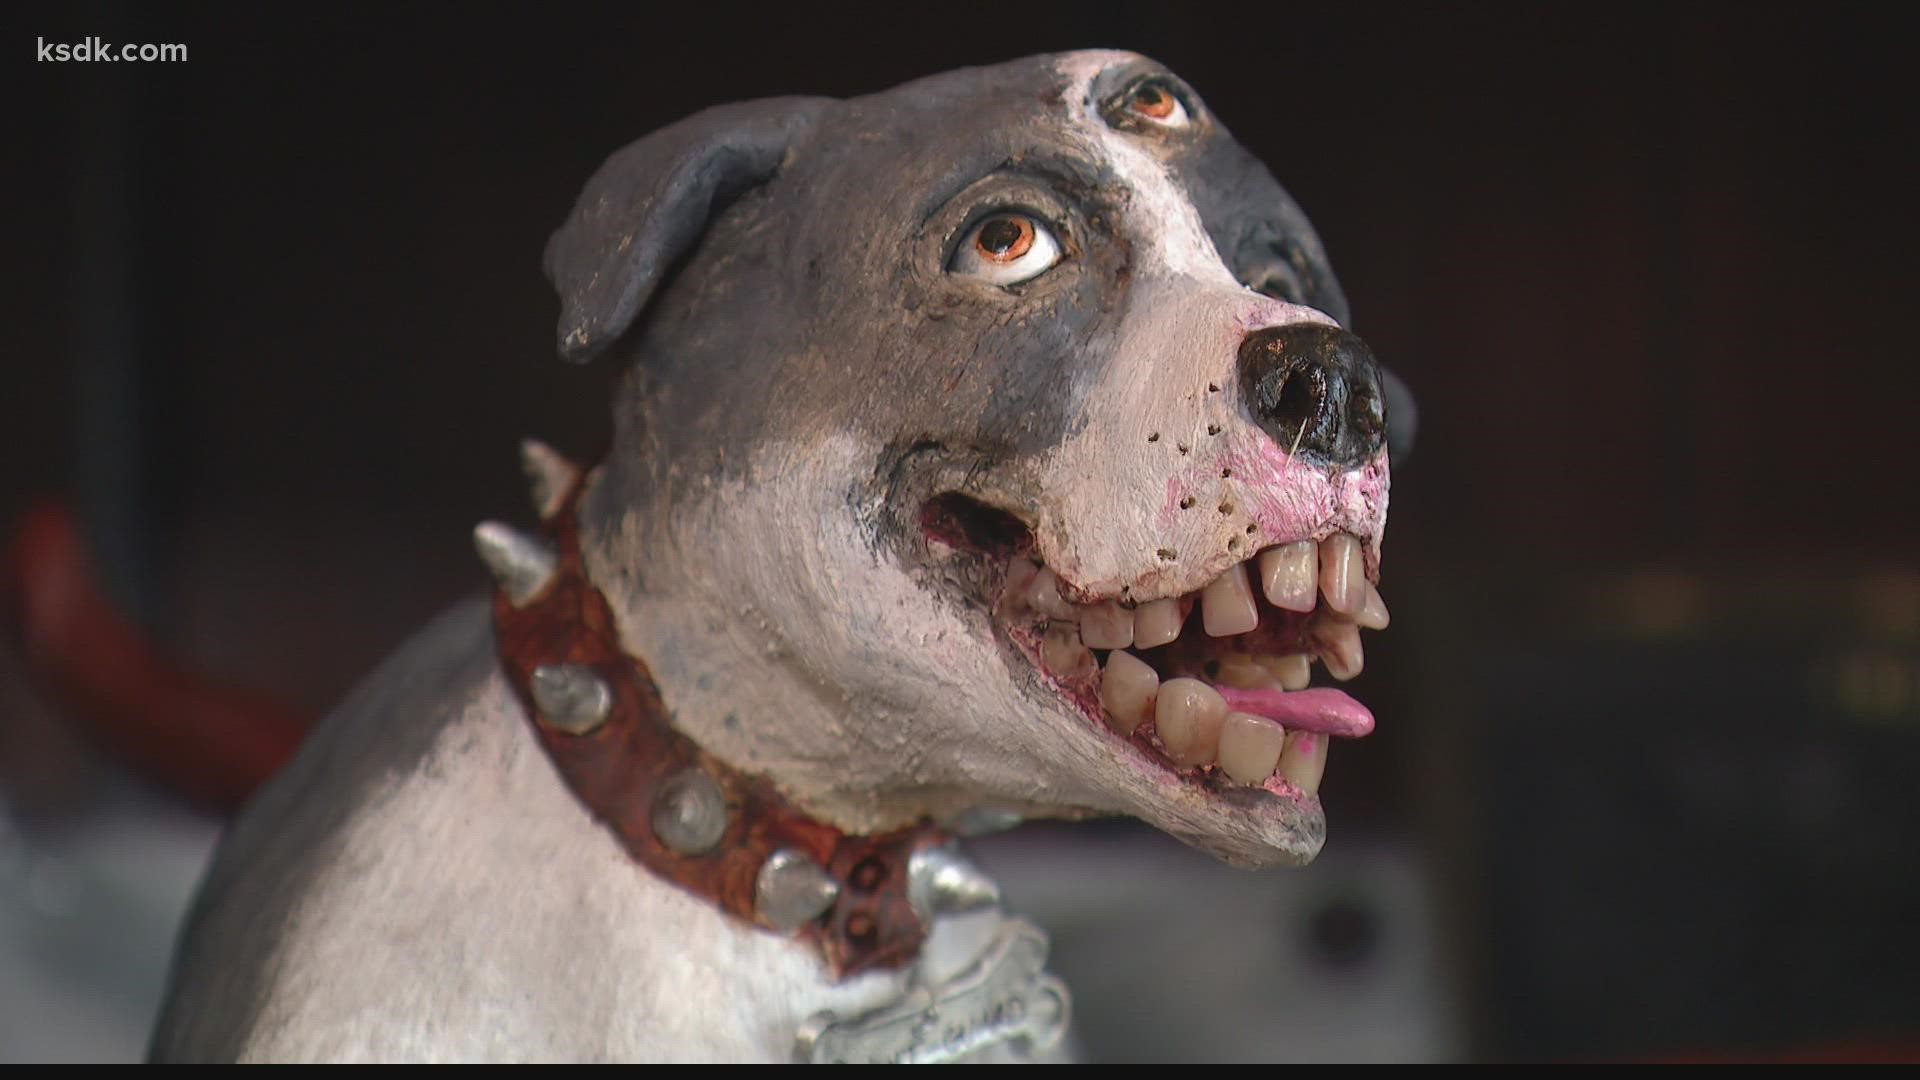 Dog lovers tend to treat their pets like people. A local artist is taking the idea of humanizing our furry friends to a whole different level.